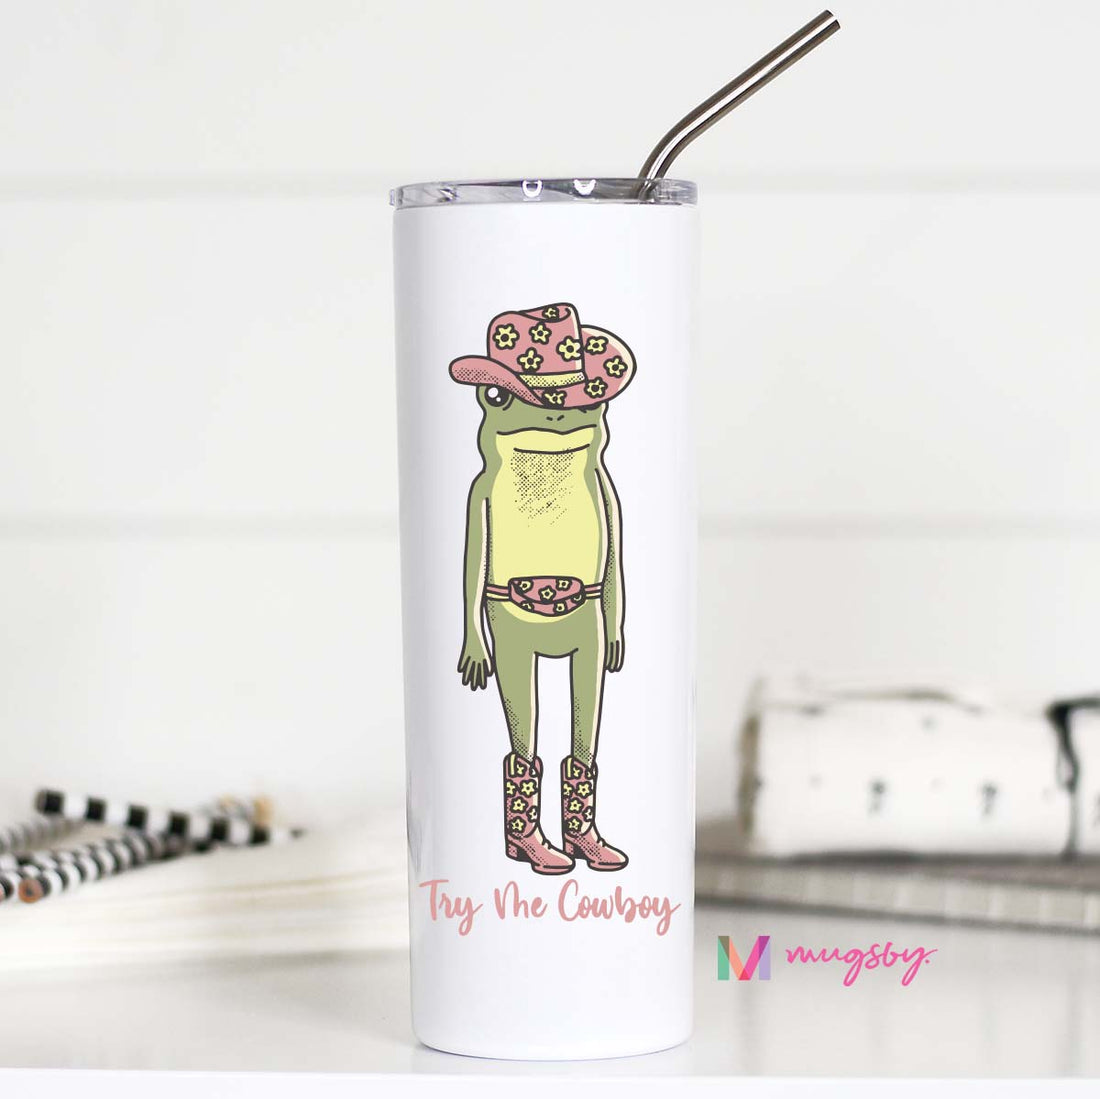 Try Me Cowboy tall travel double insulated mug